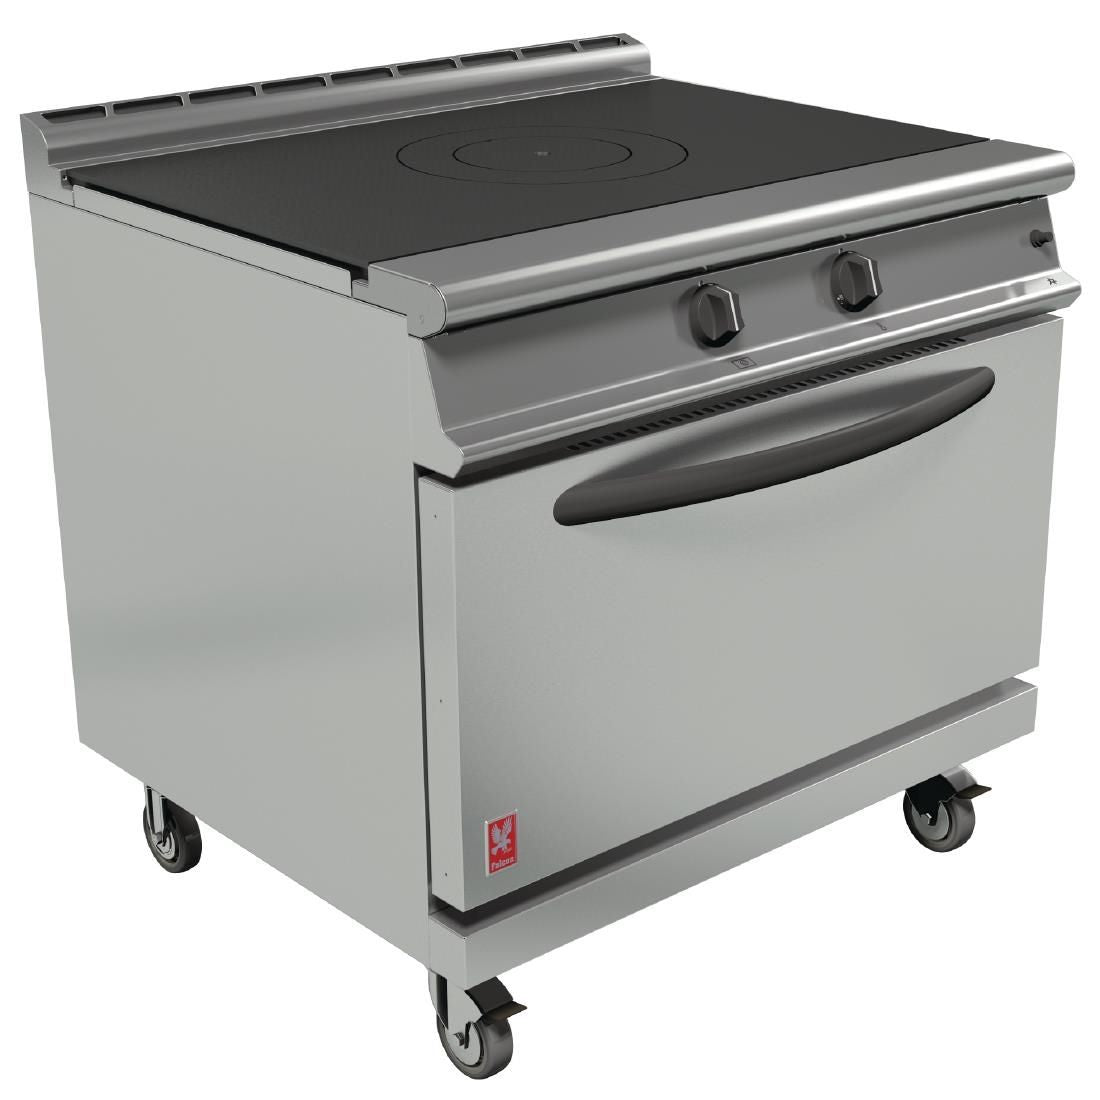 Falcon Dominator Plus Solid Top Natural/LPG Oven Range G3107D JD Catering Equipment Solutions Ltd